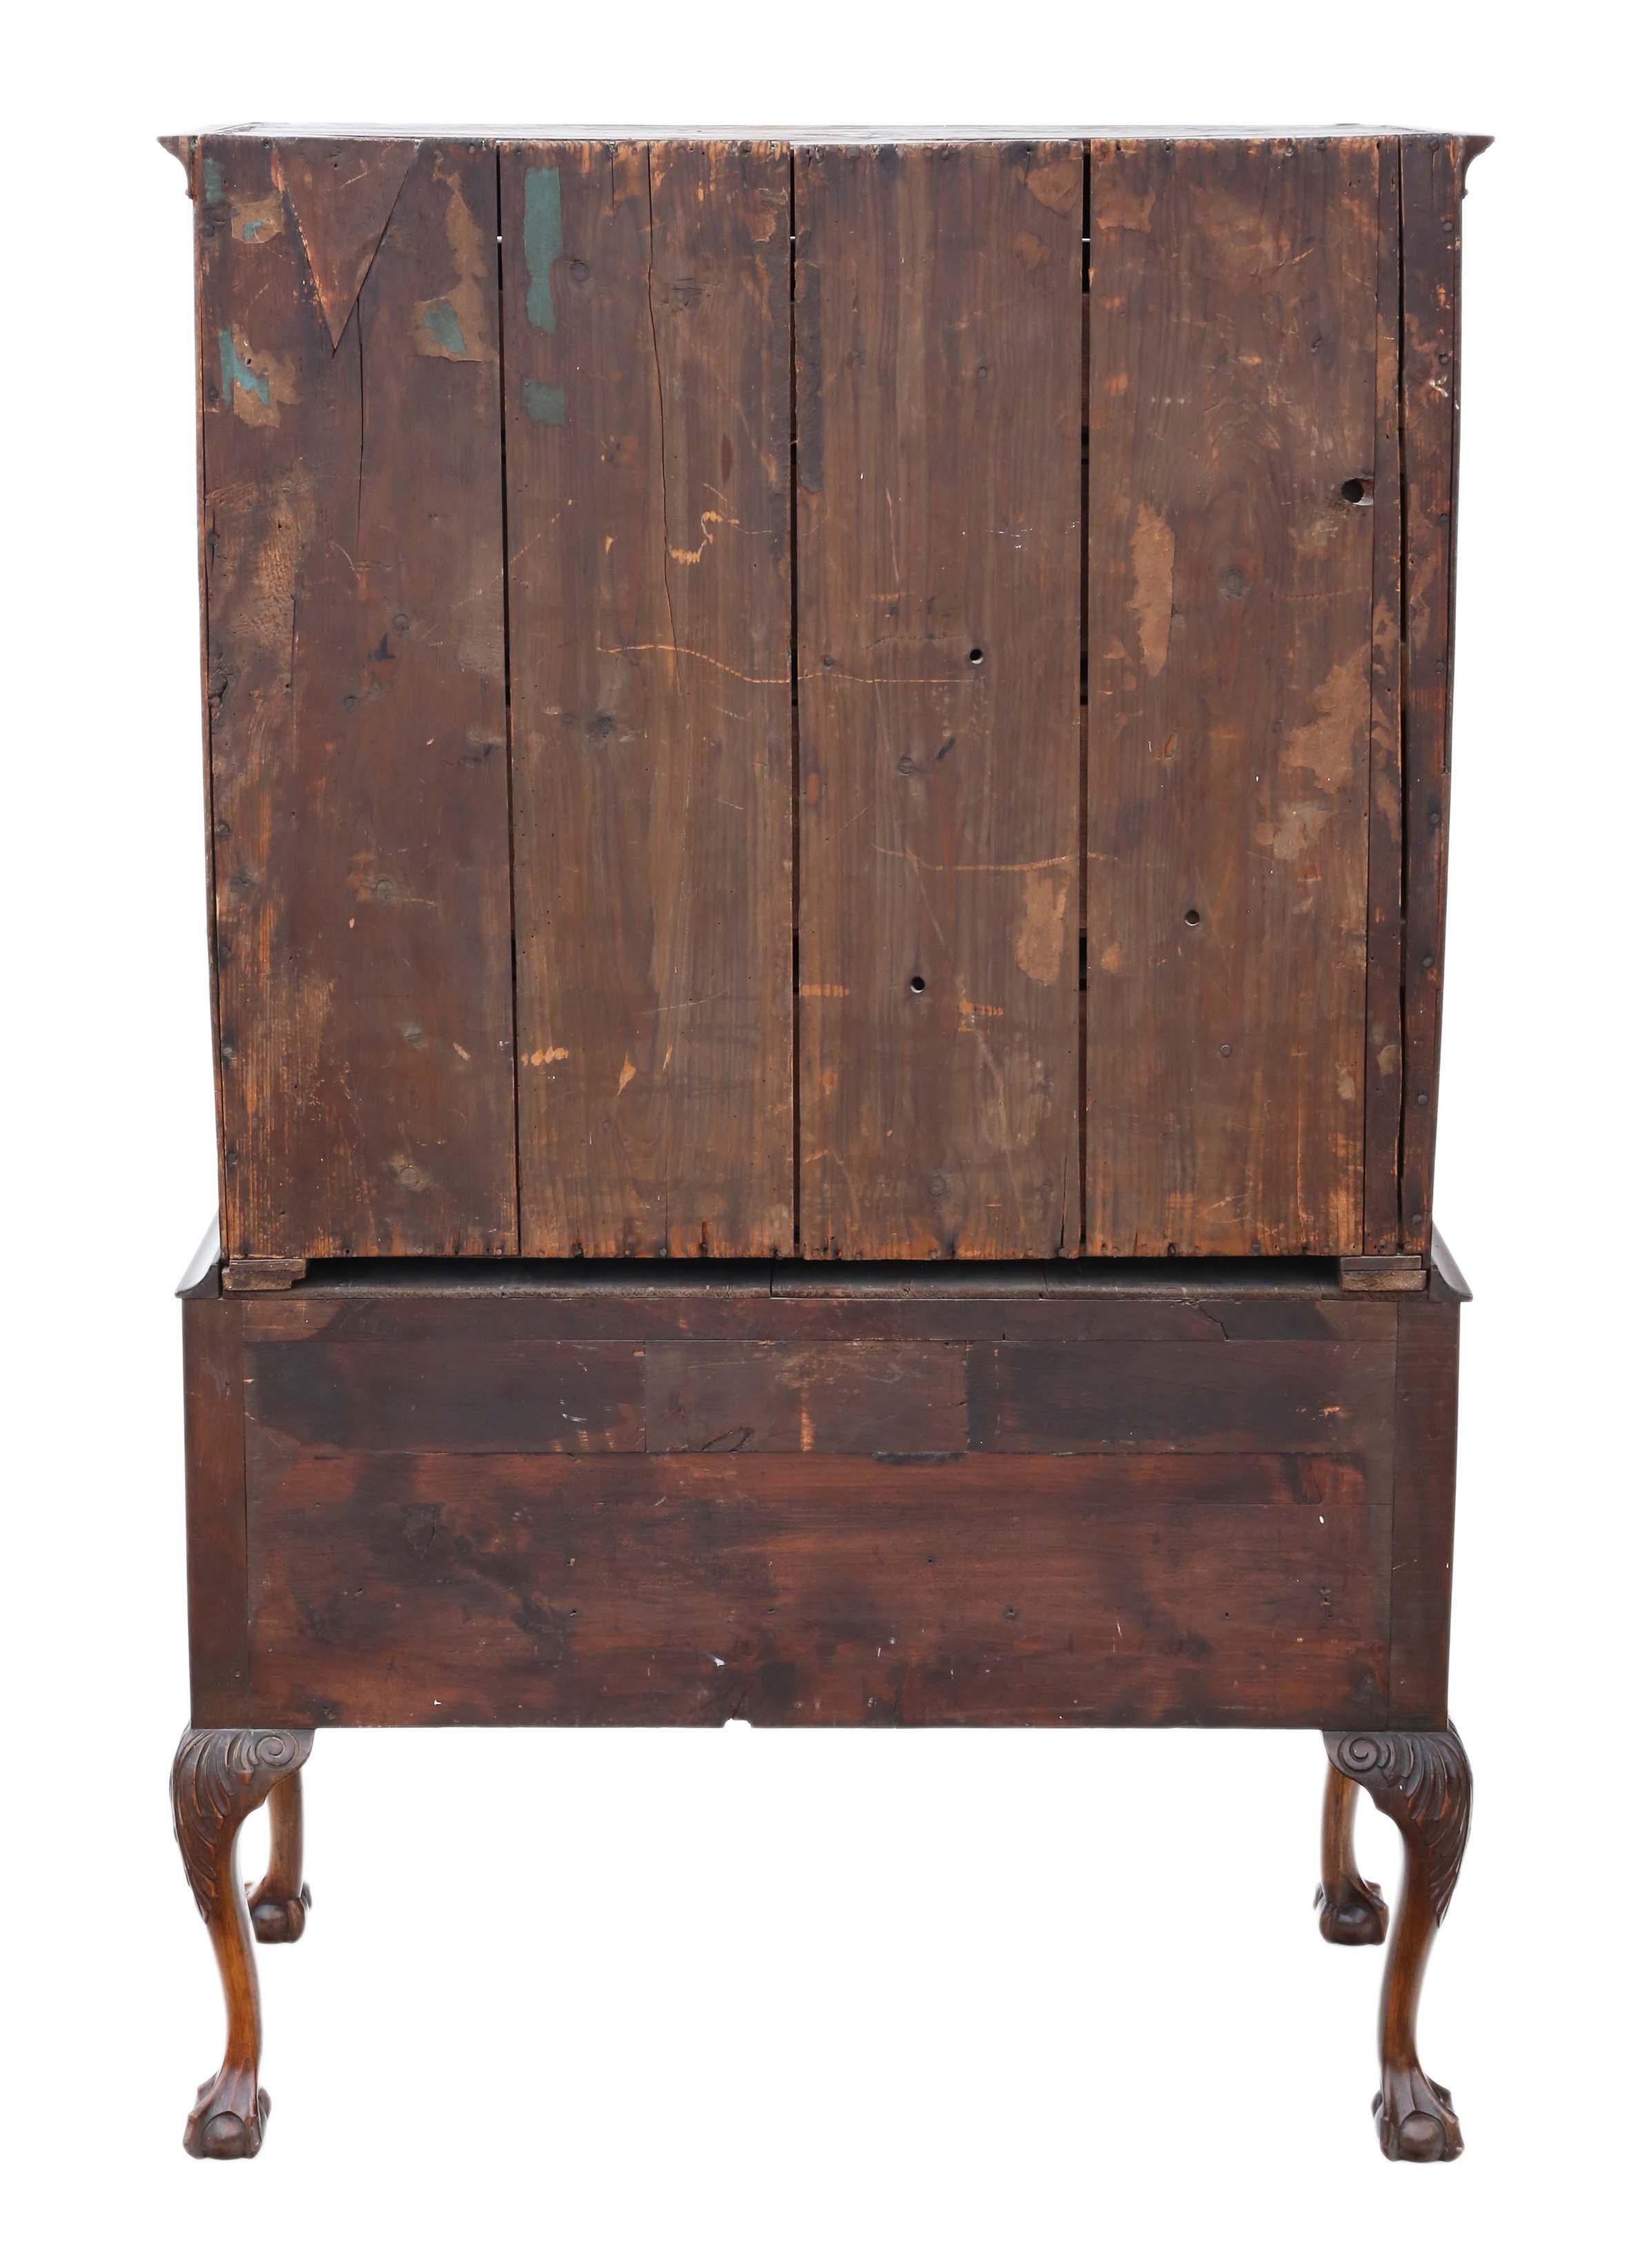 Antique Georgian Figured Walnut Chest of Drawers on Stand from the 18th Century For Sale 4